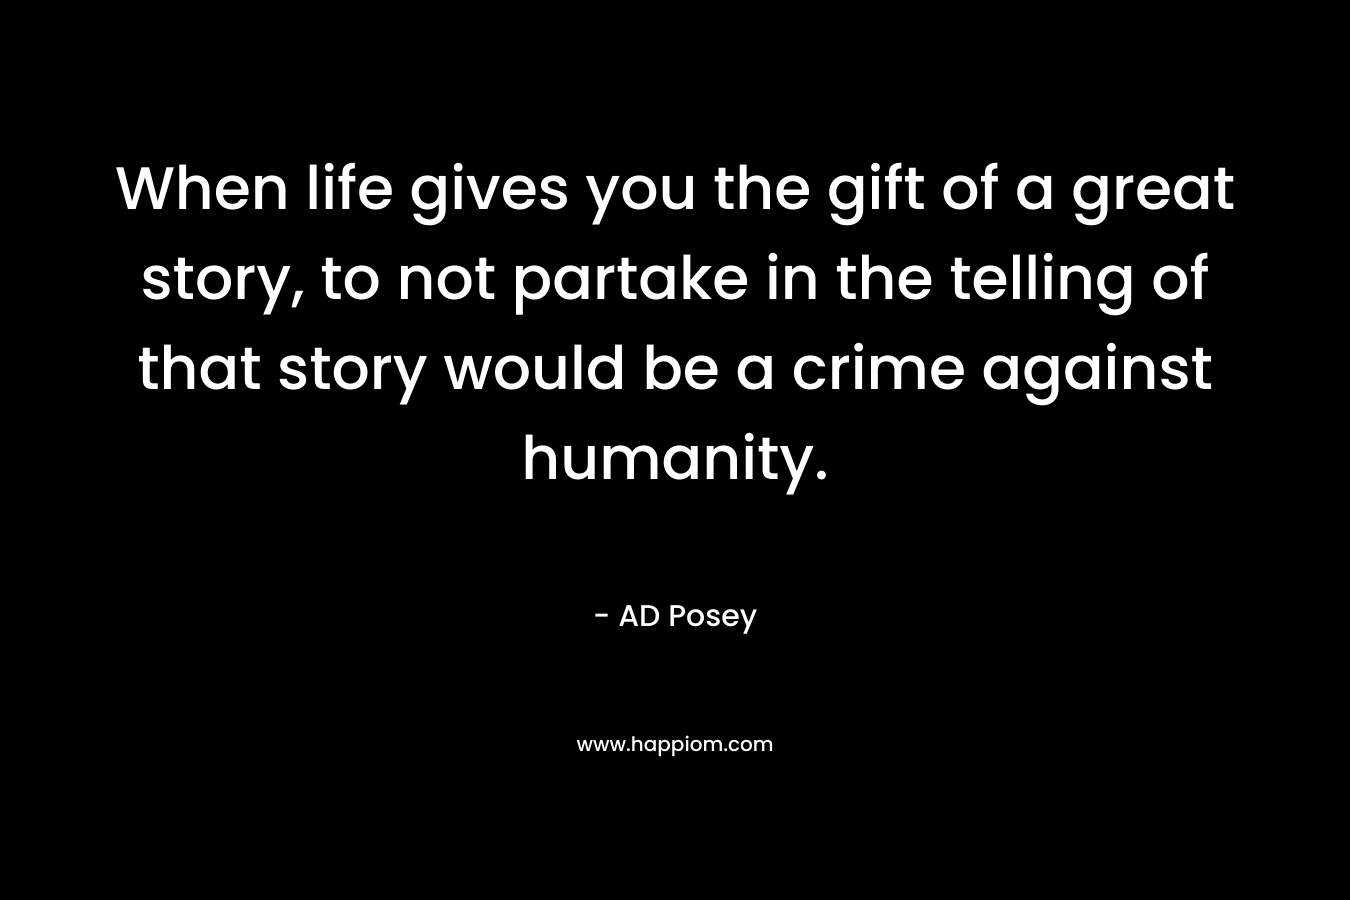 When life gives you the gift of a great story, to not partake in the telling of that story would be a crime against humanity. – AD Posey